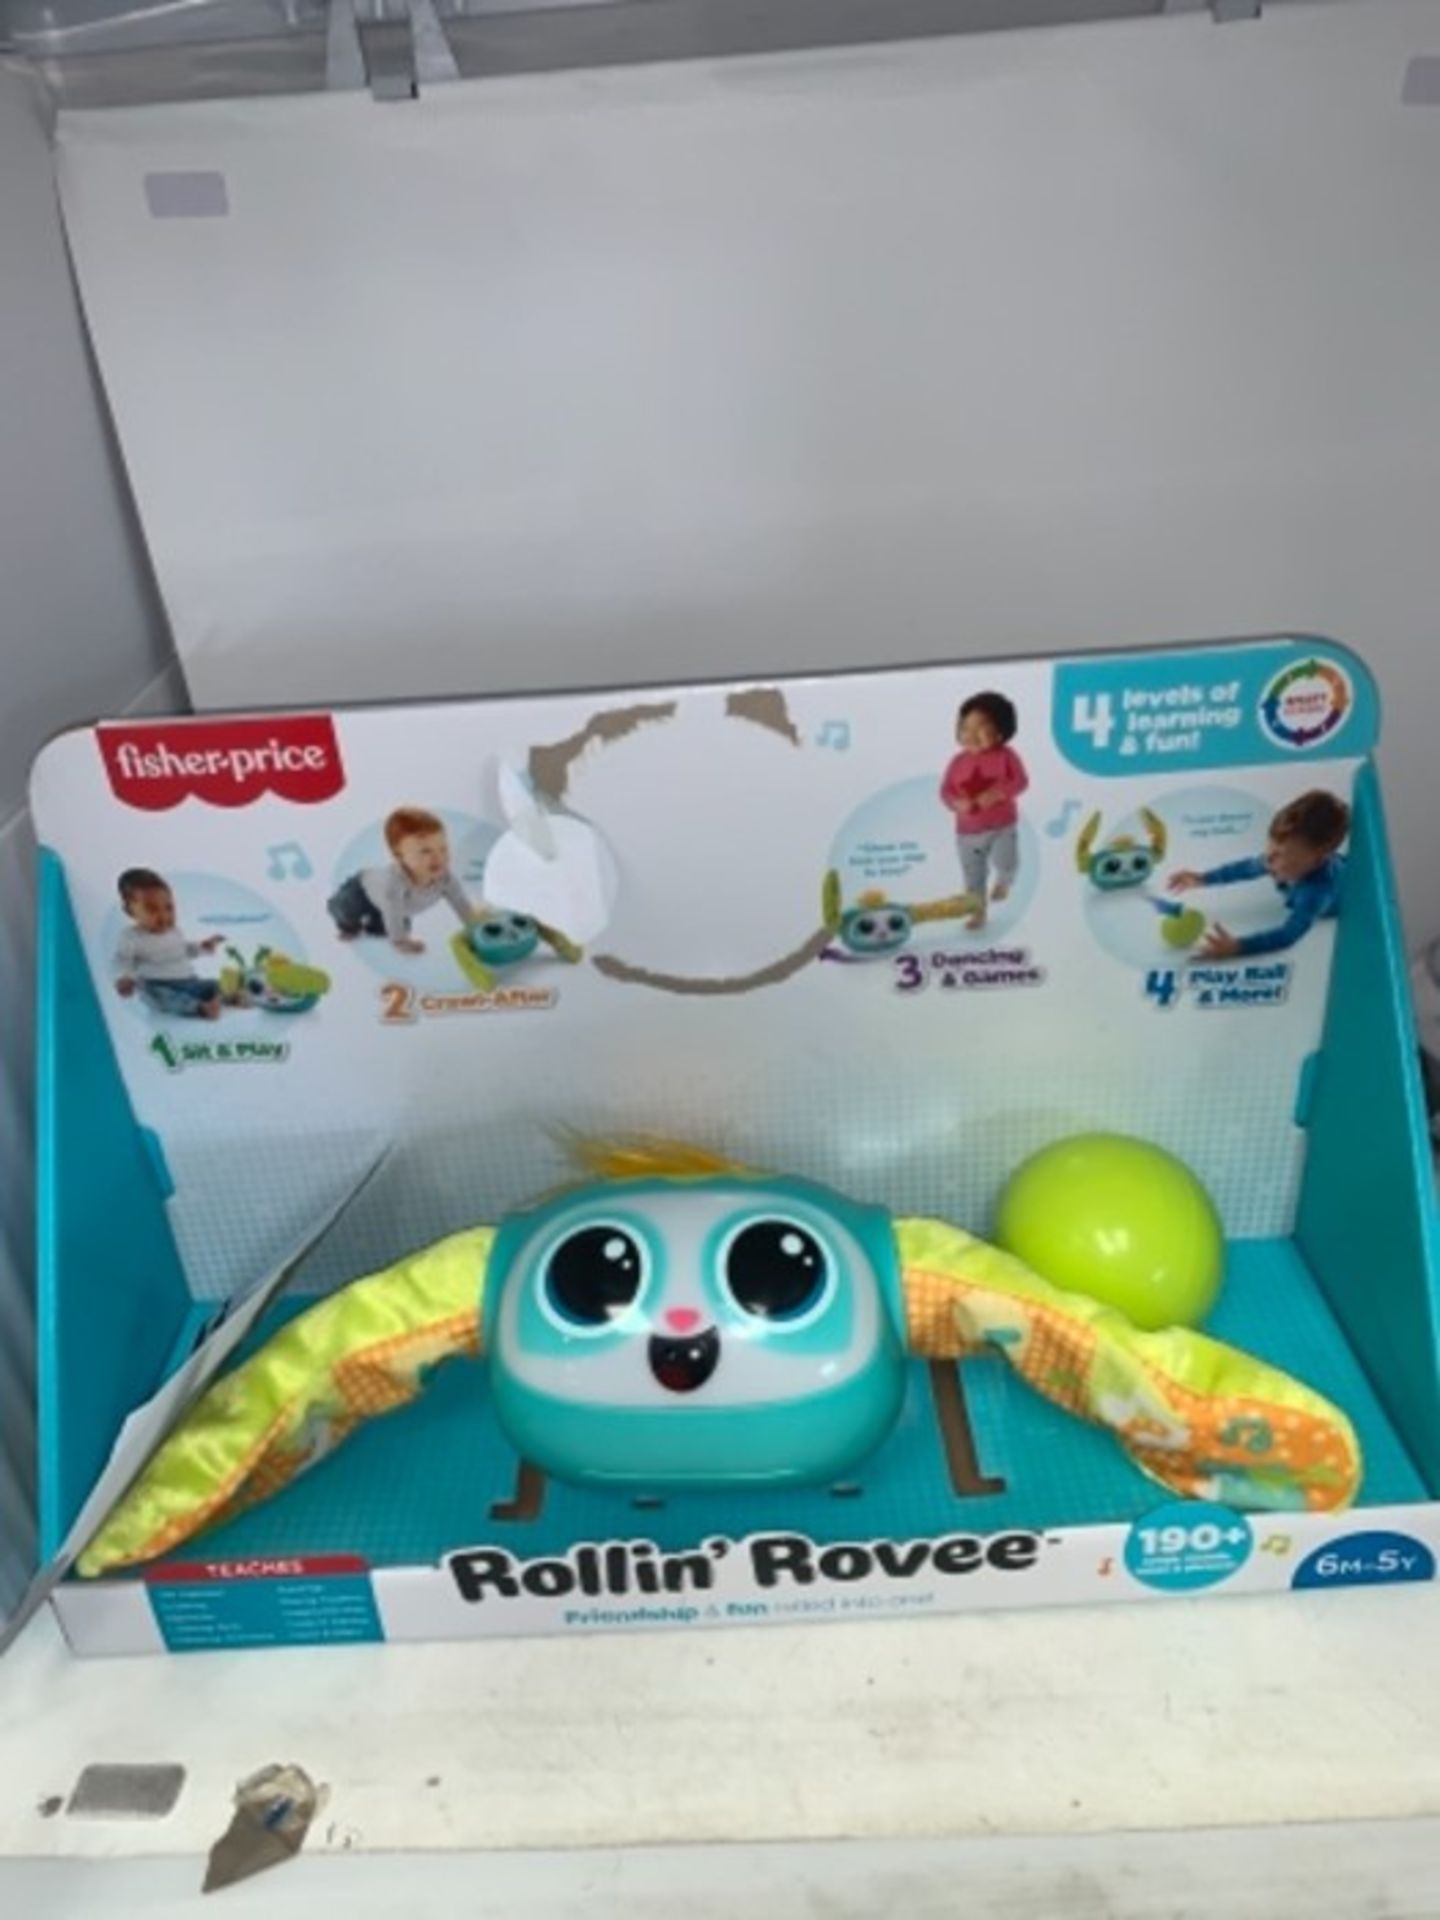 Fisher-Price Rollin' Rovee - Image 2 of 2